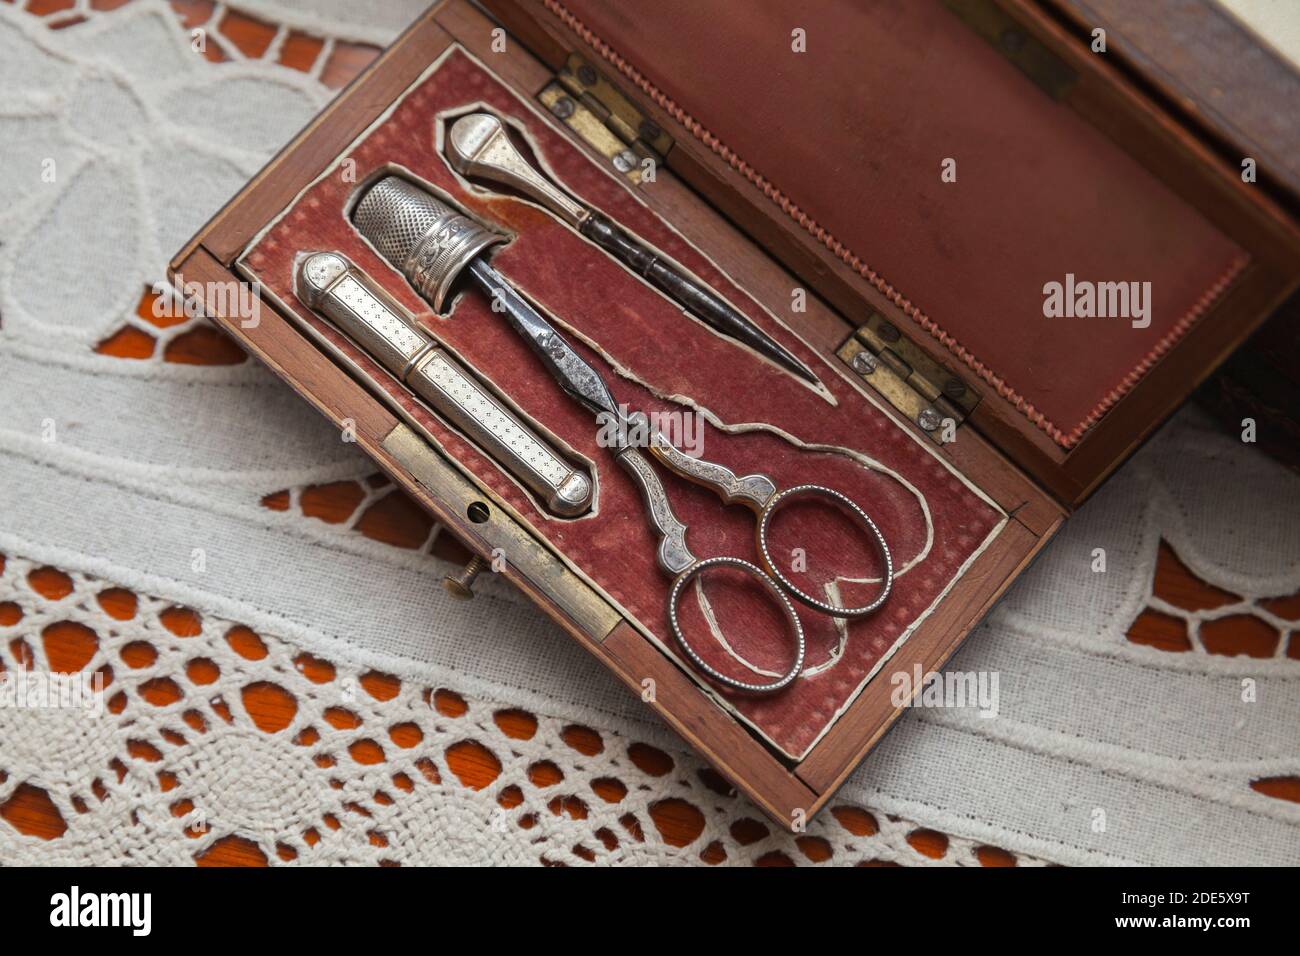 Vintage sewing kit with scissors, thimble and awl Stock Photo